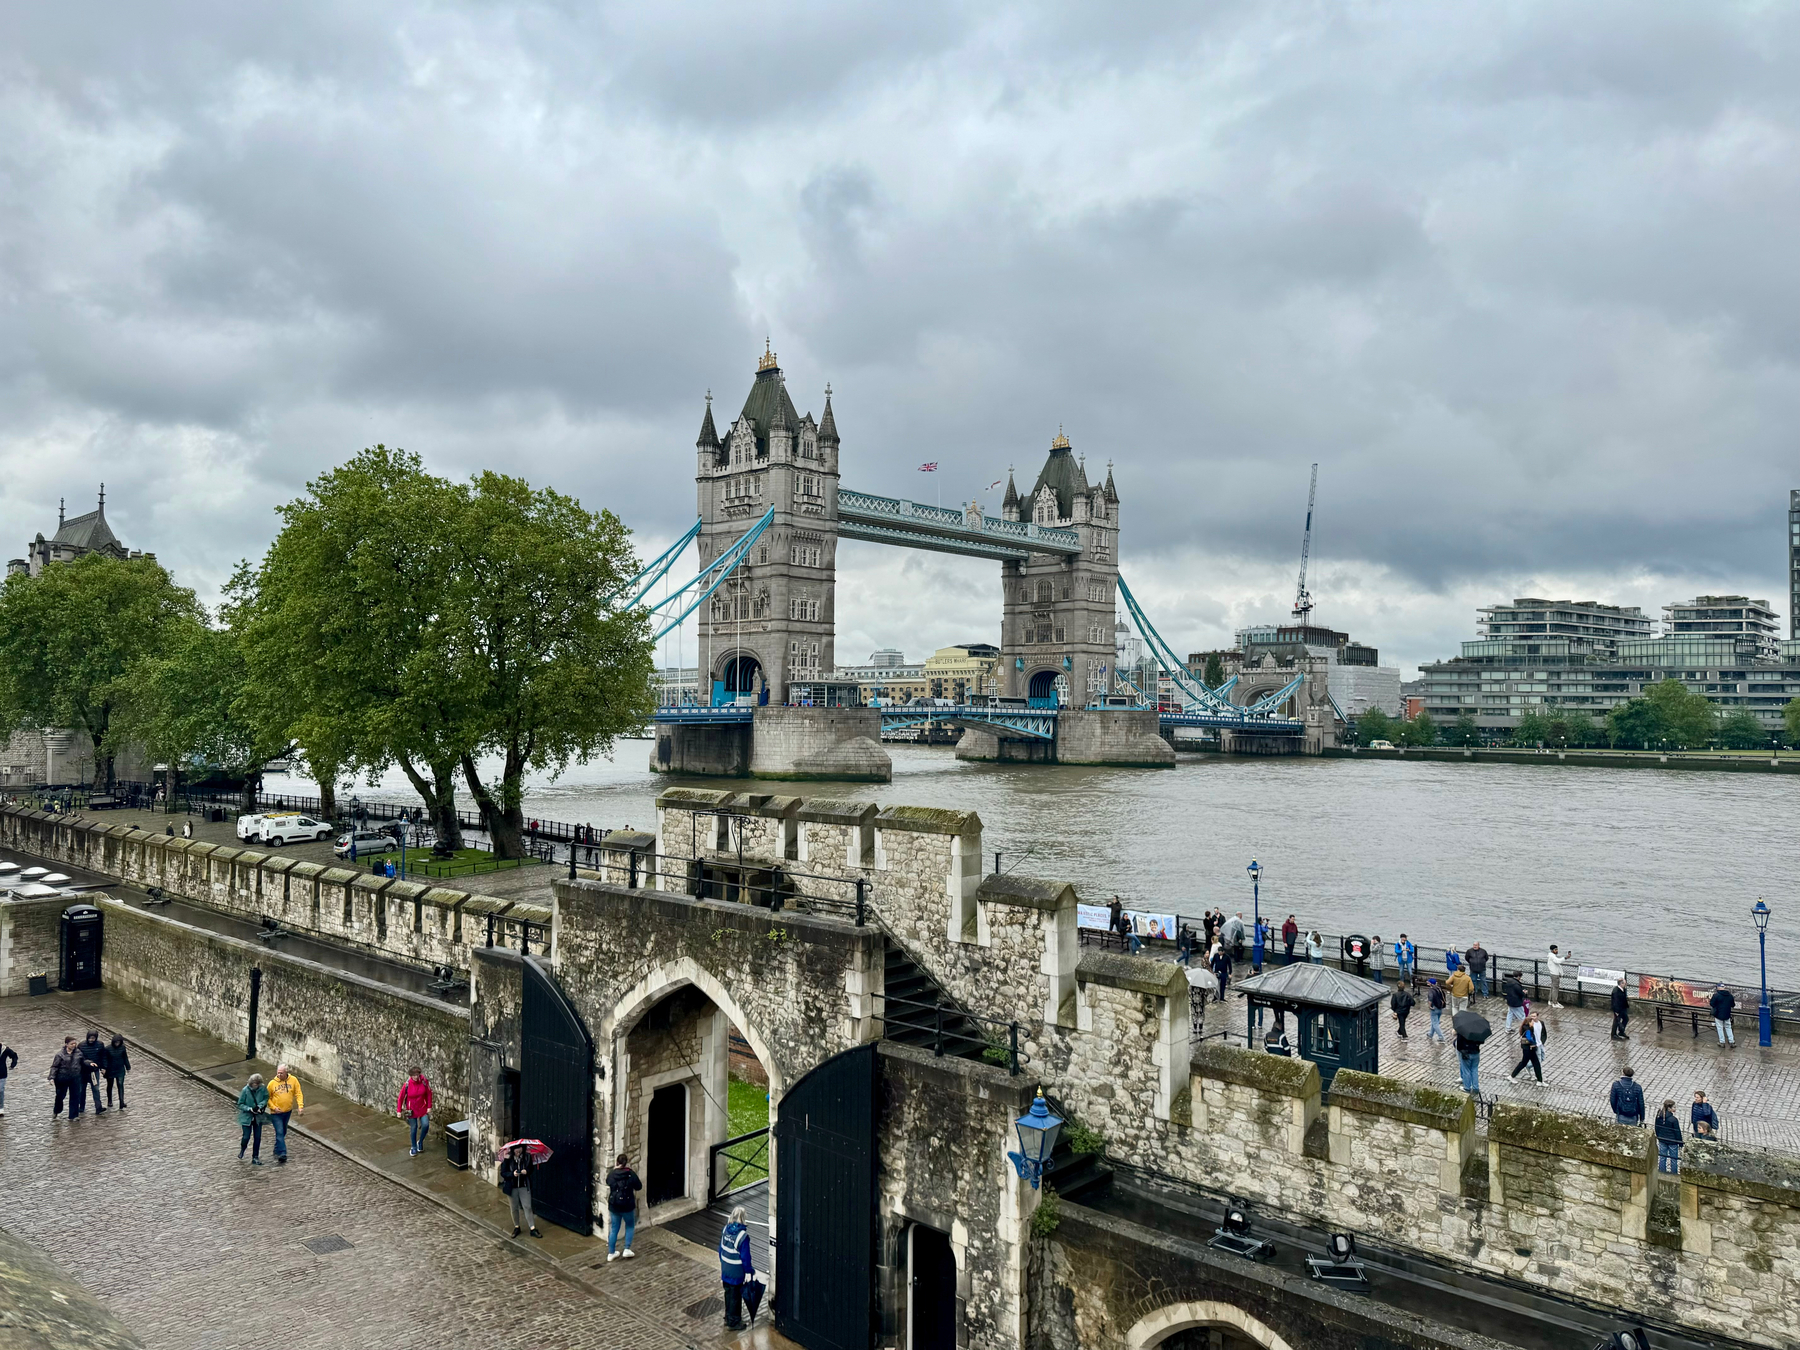 Tower Bridge over the River Thames in London, viewed from a high vantage point showing the bridge’s twin Gothic towers, with people walking along the riverbank and part of the historical Tower of London visible in the foreground.